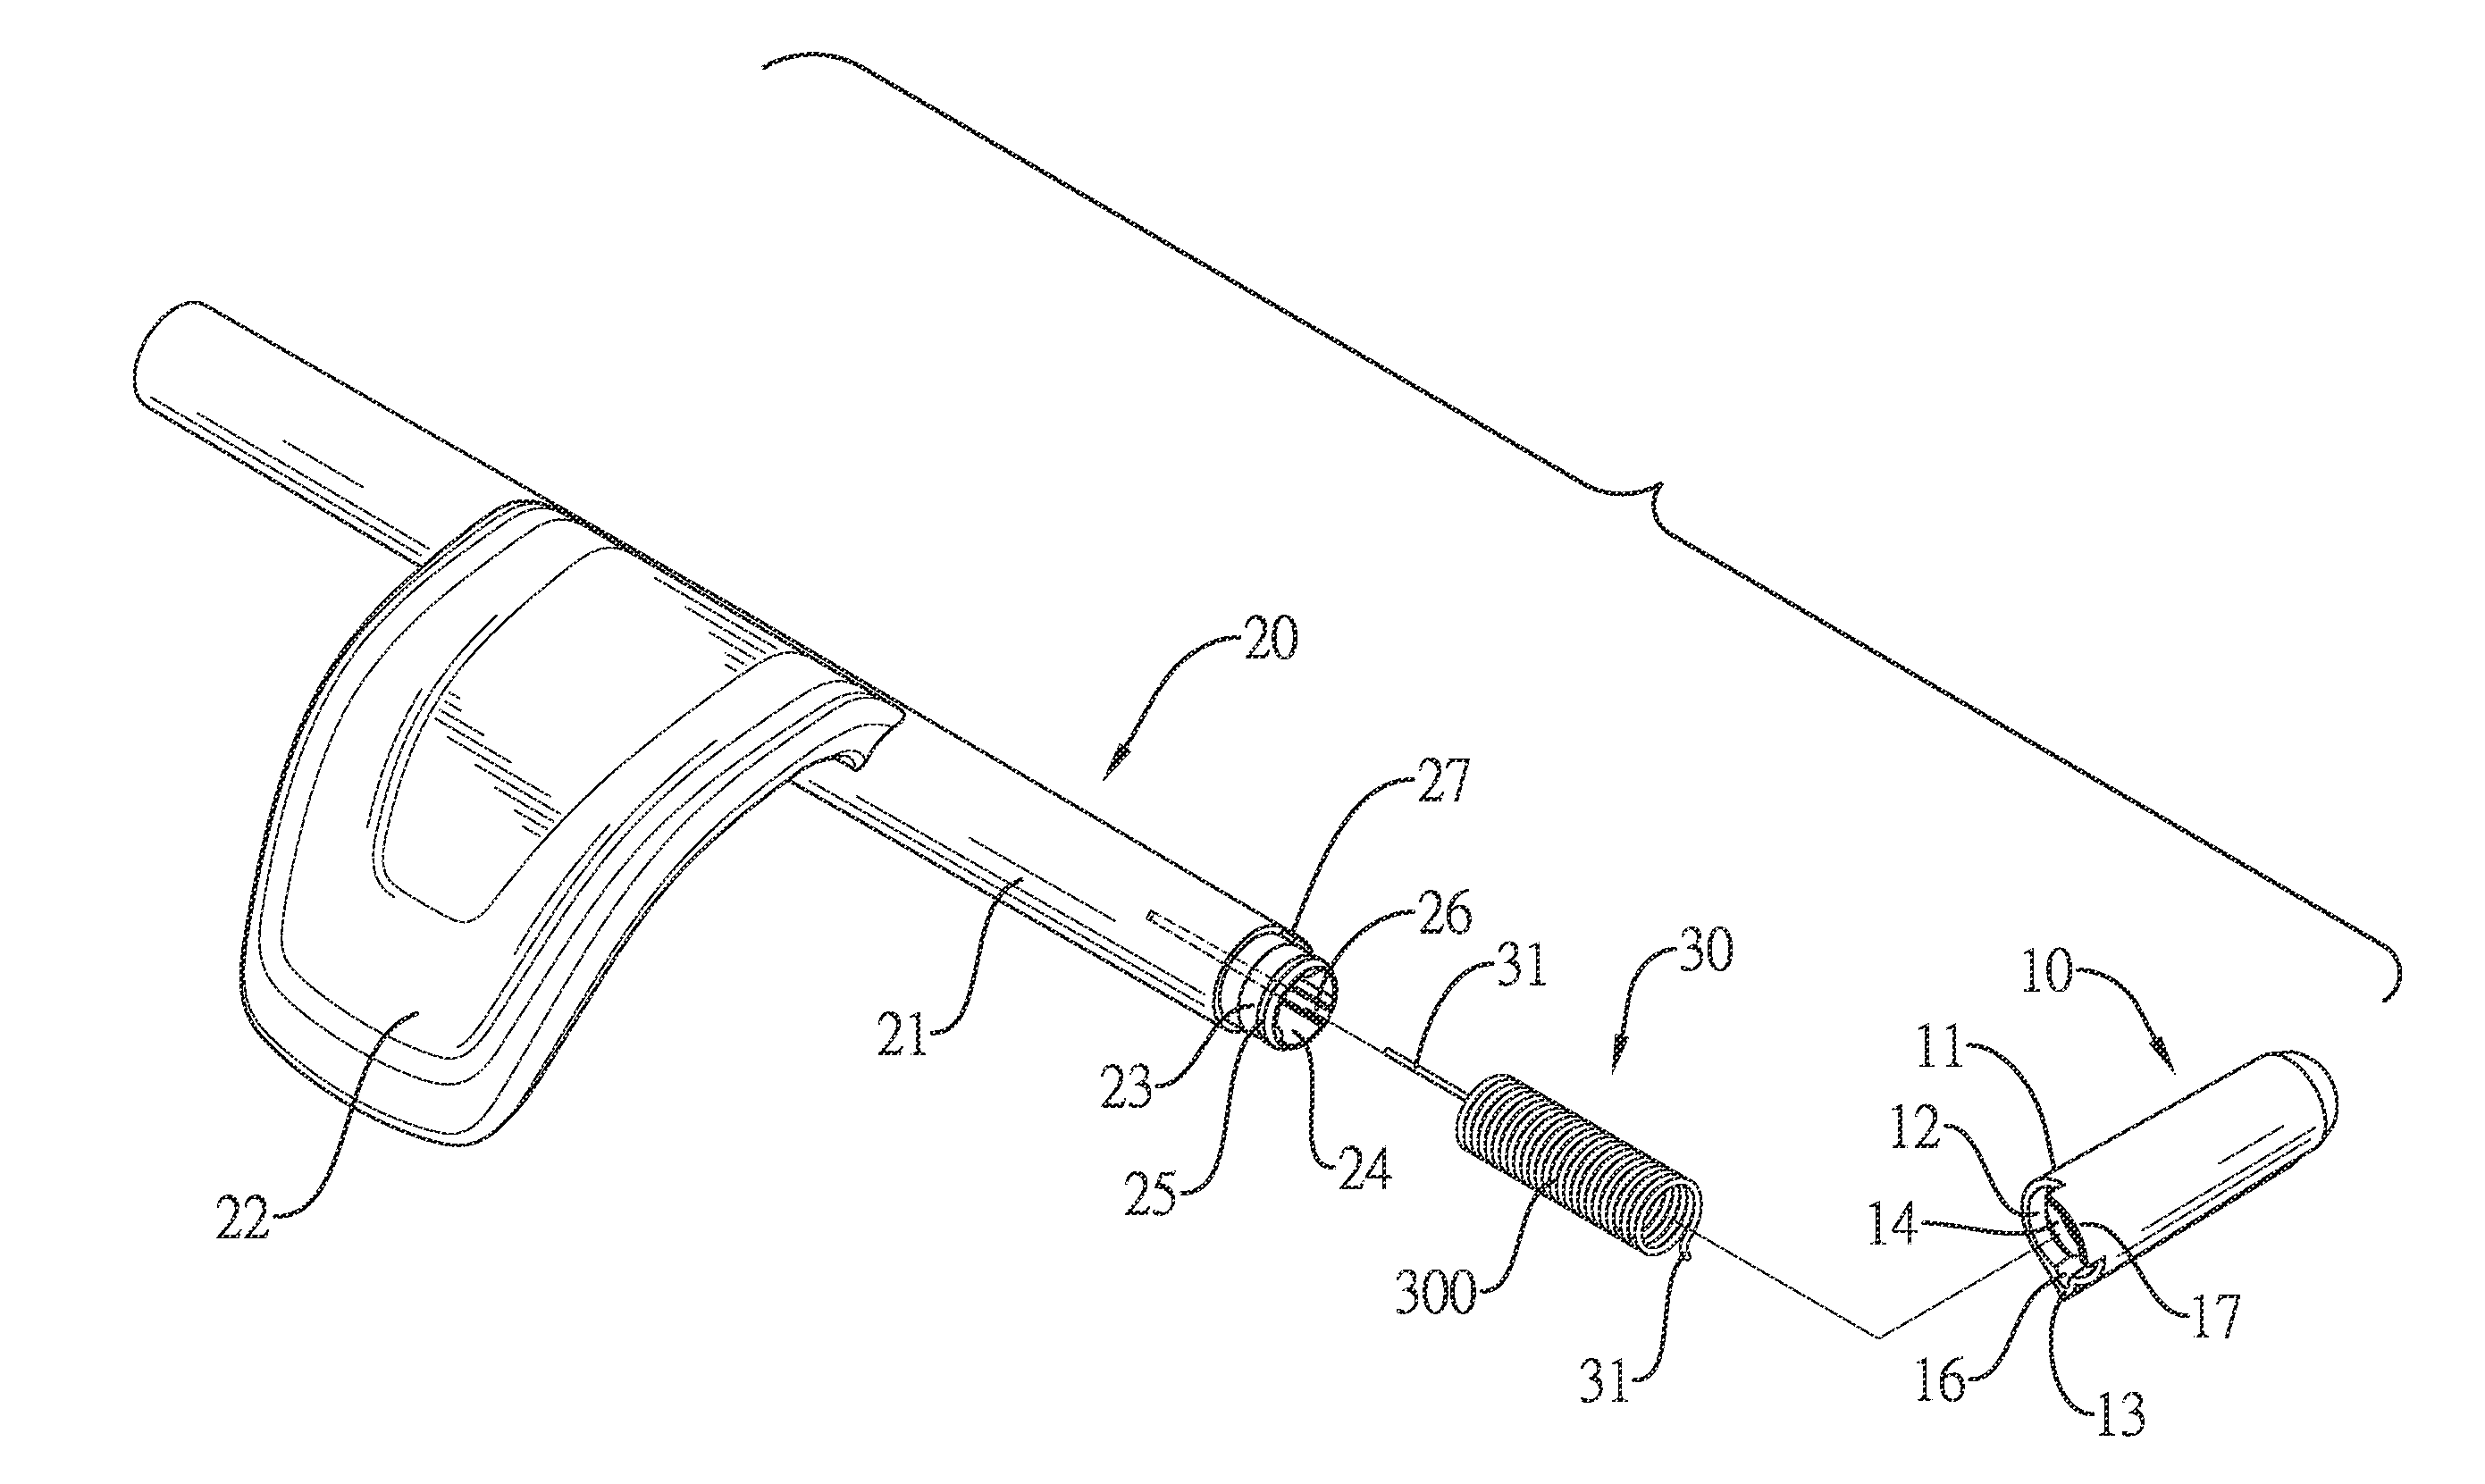 Automatic reset device for curtain pull bar